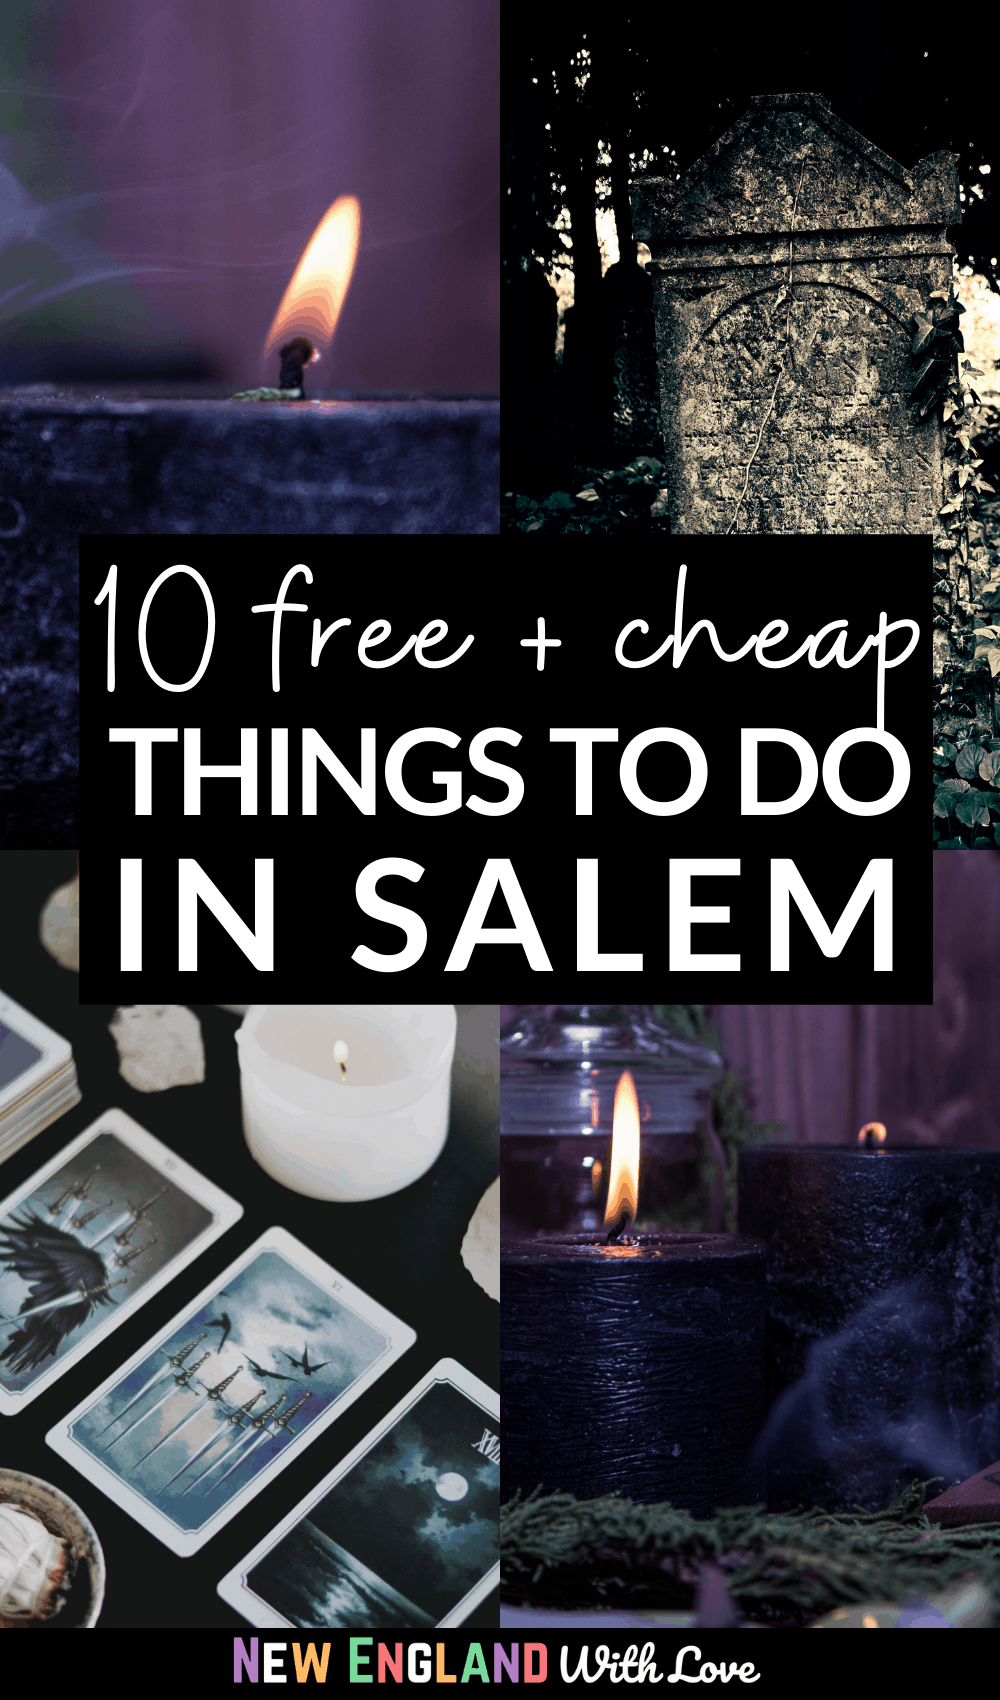 Pinterest graphic reading "10 free & cheap THINGS TO DO IN SALEM"